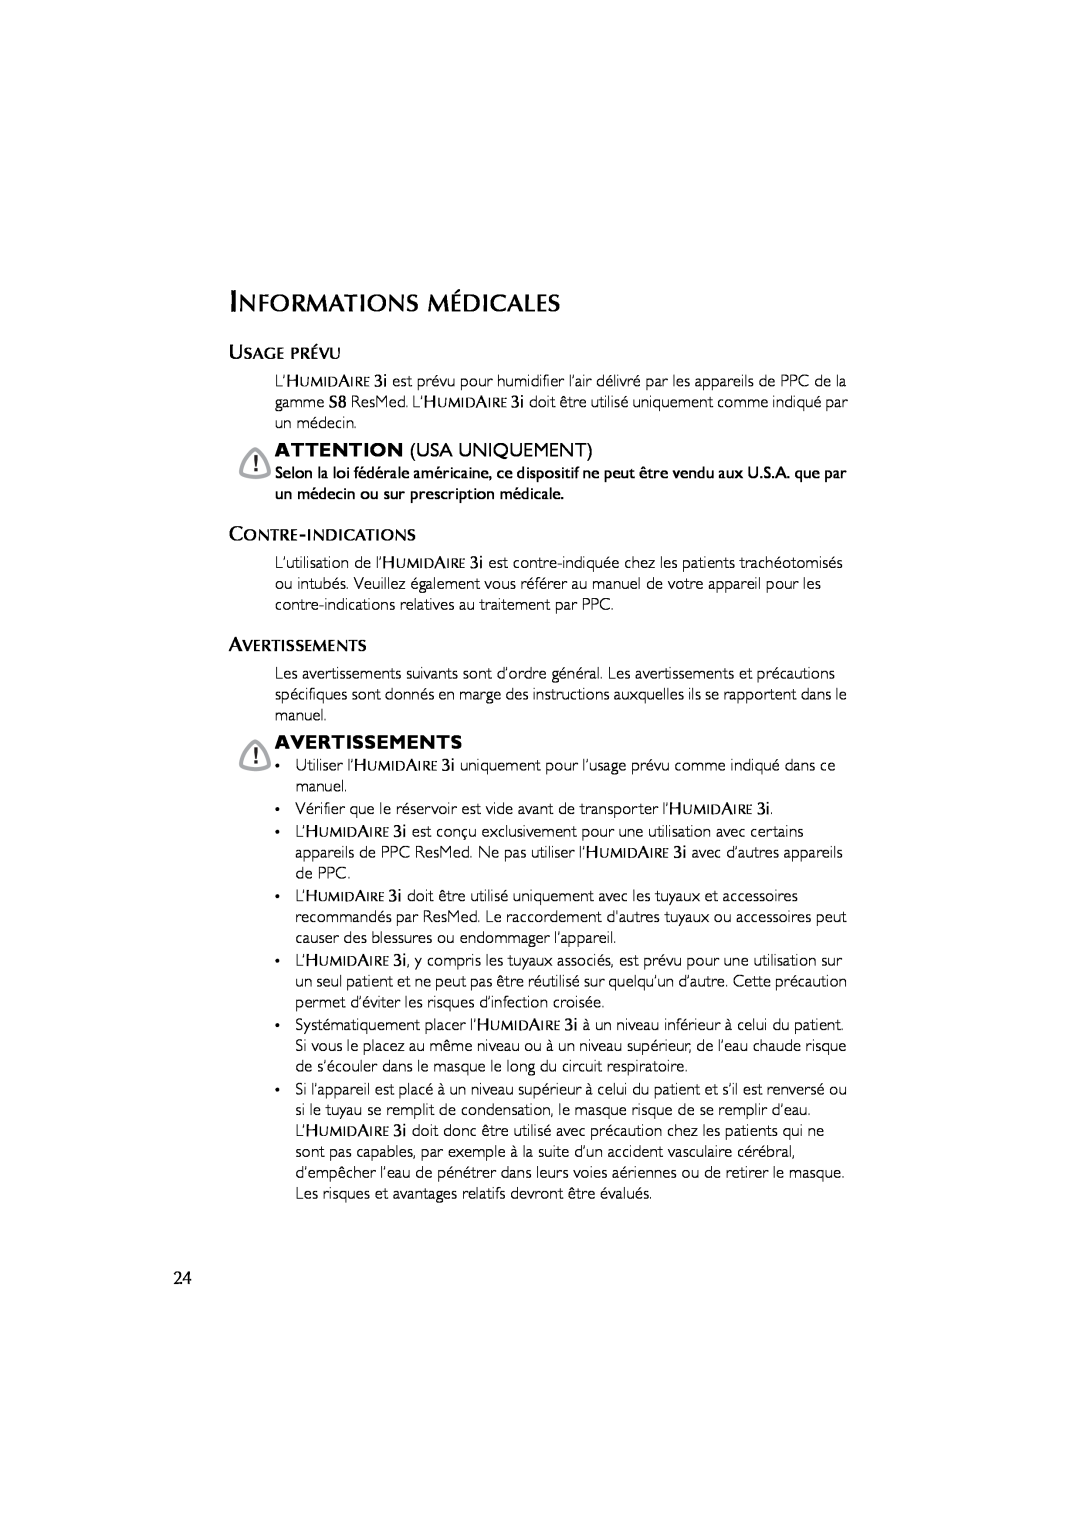 ResMed 3I user manual Informations Médicales, Attention Usa Uniquement, Avertissements 